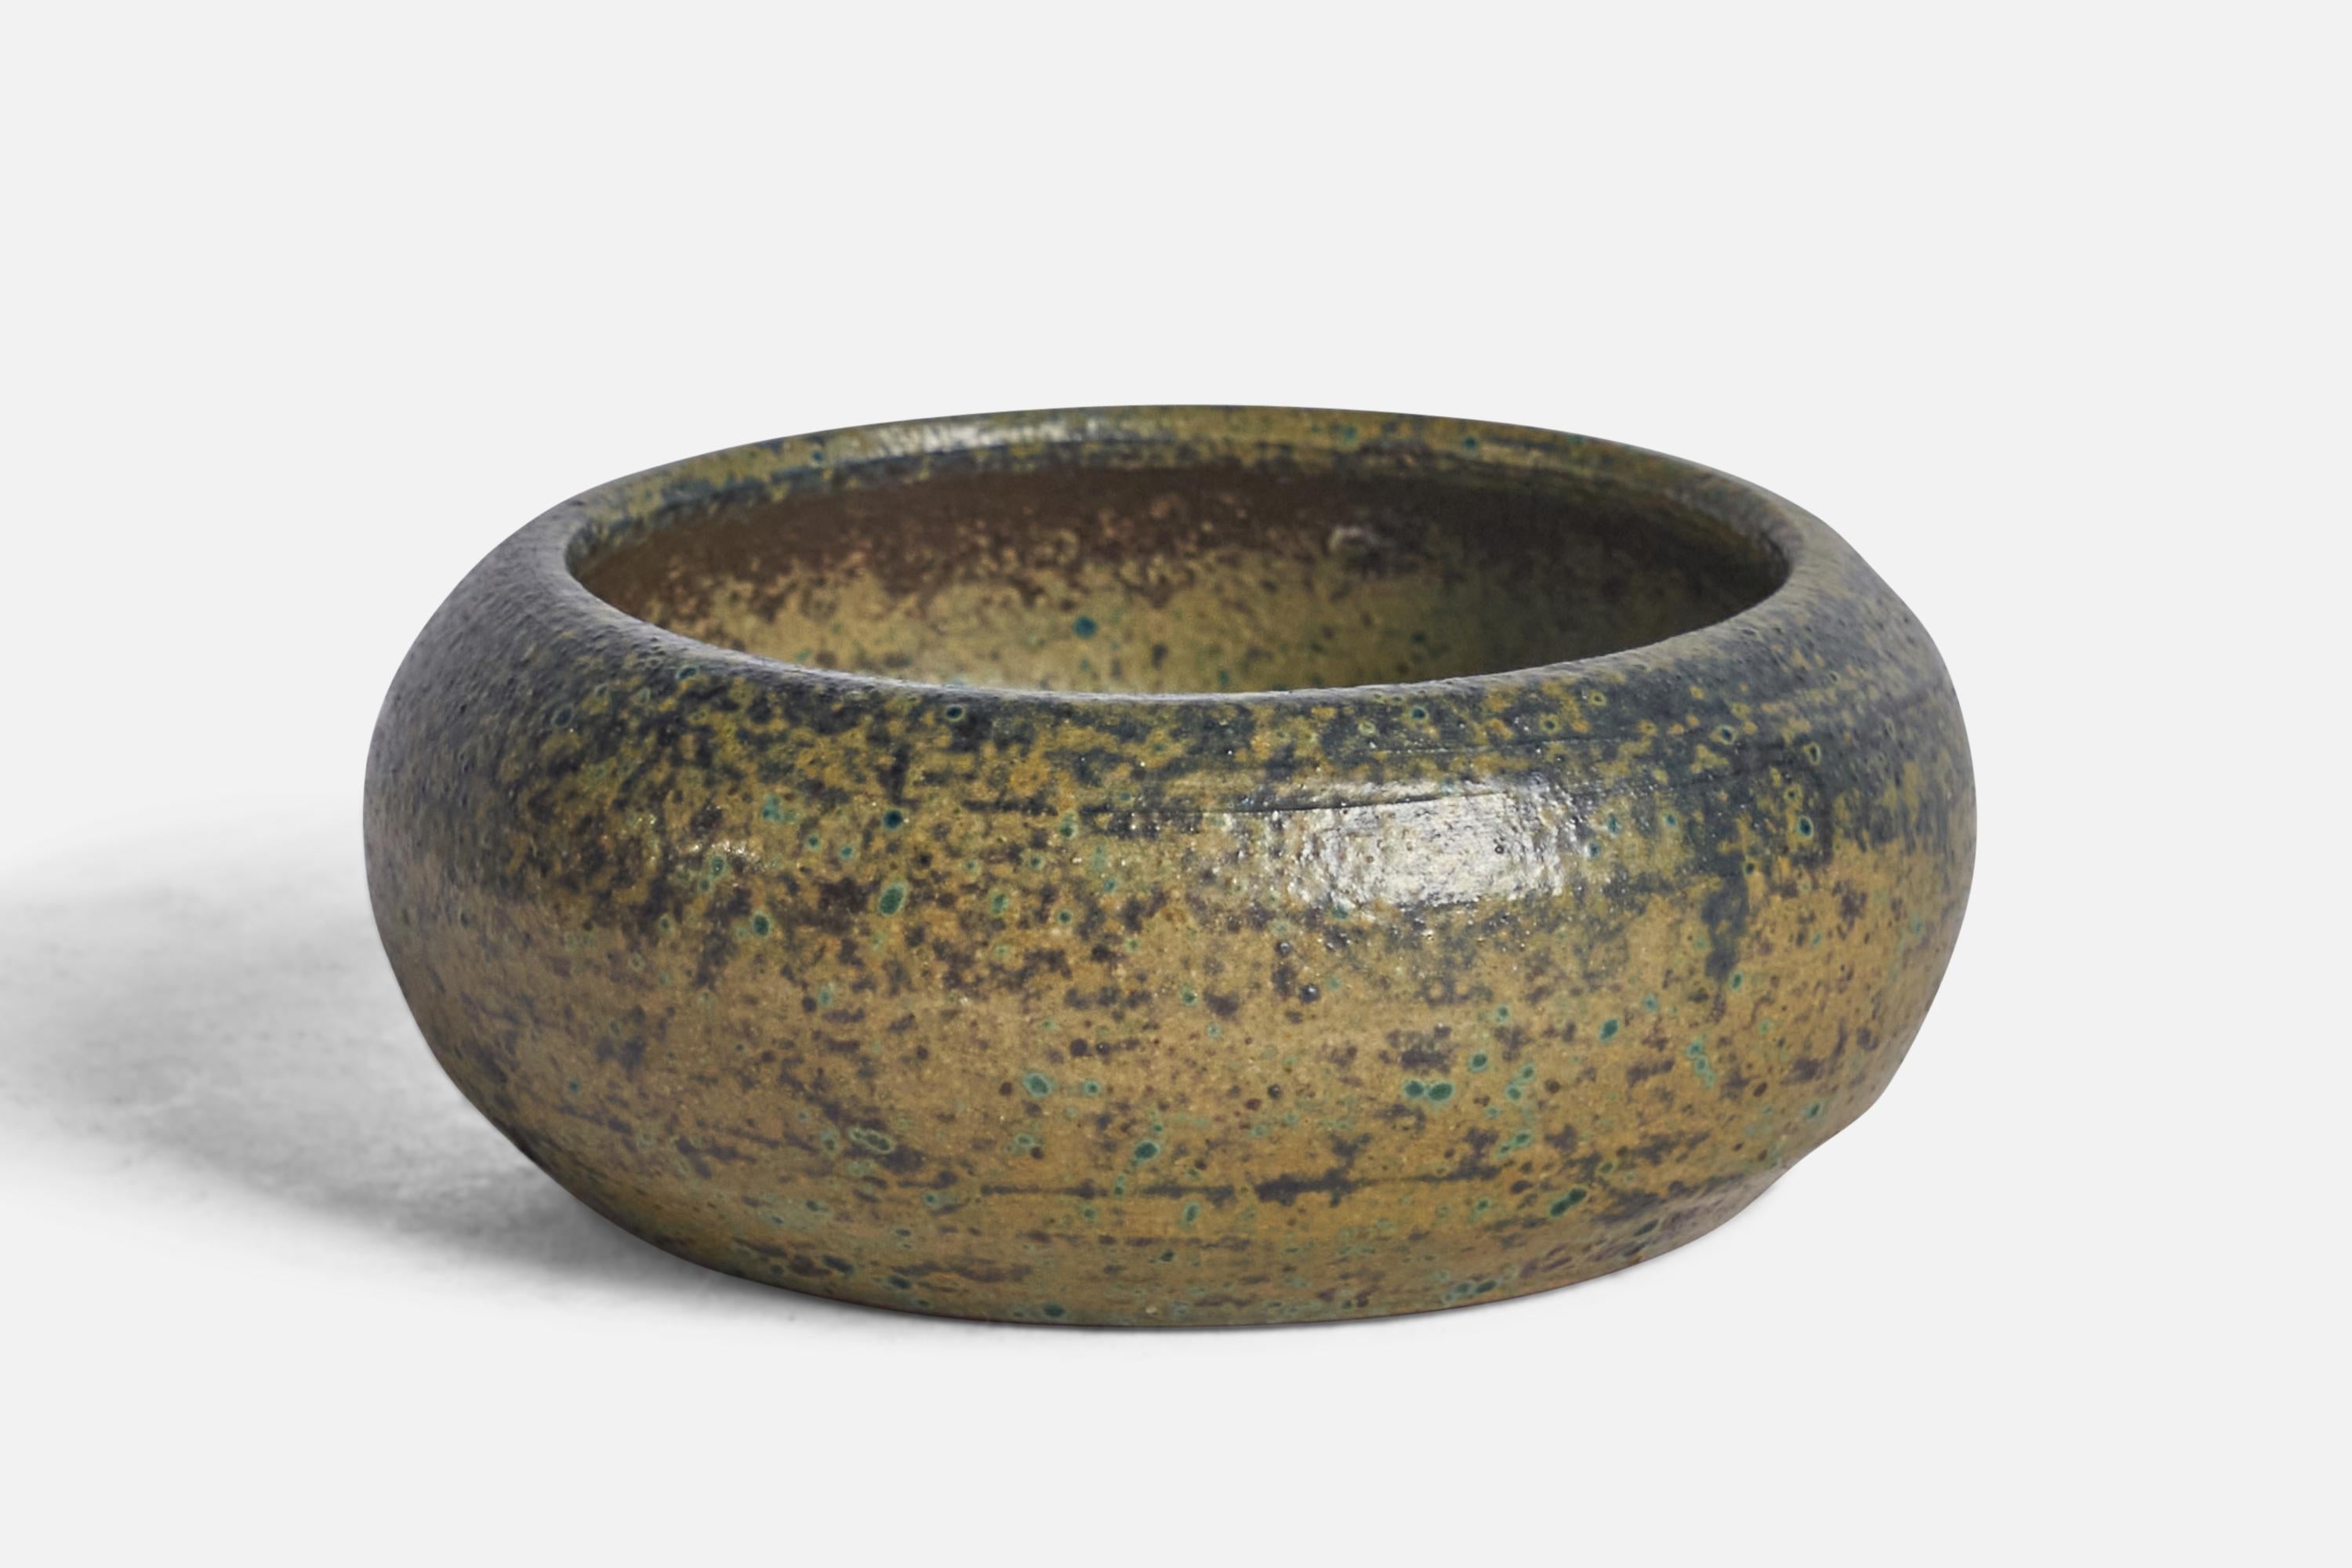 A small green-glazed ceramic bowl designed and produced by Seutula Finland, 1960s.